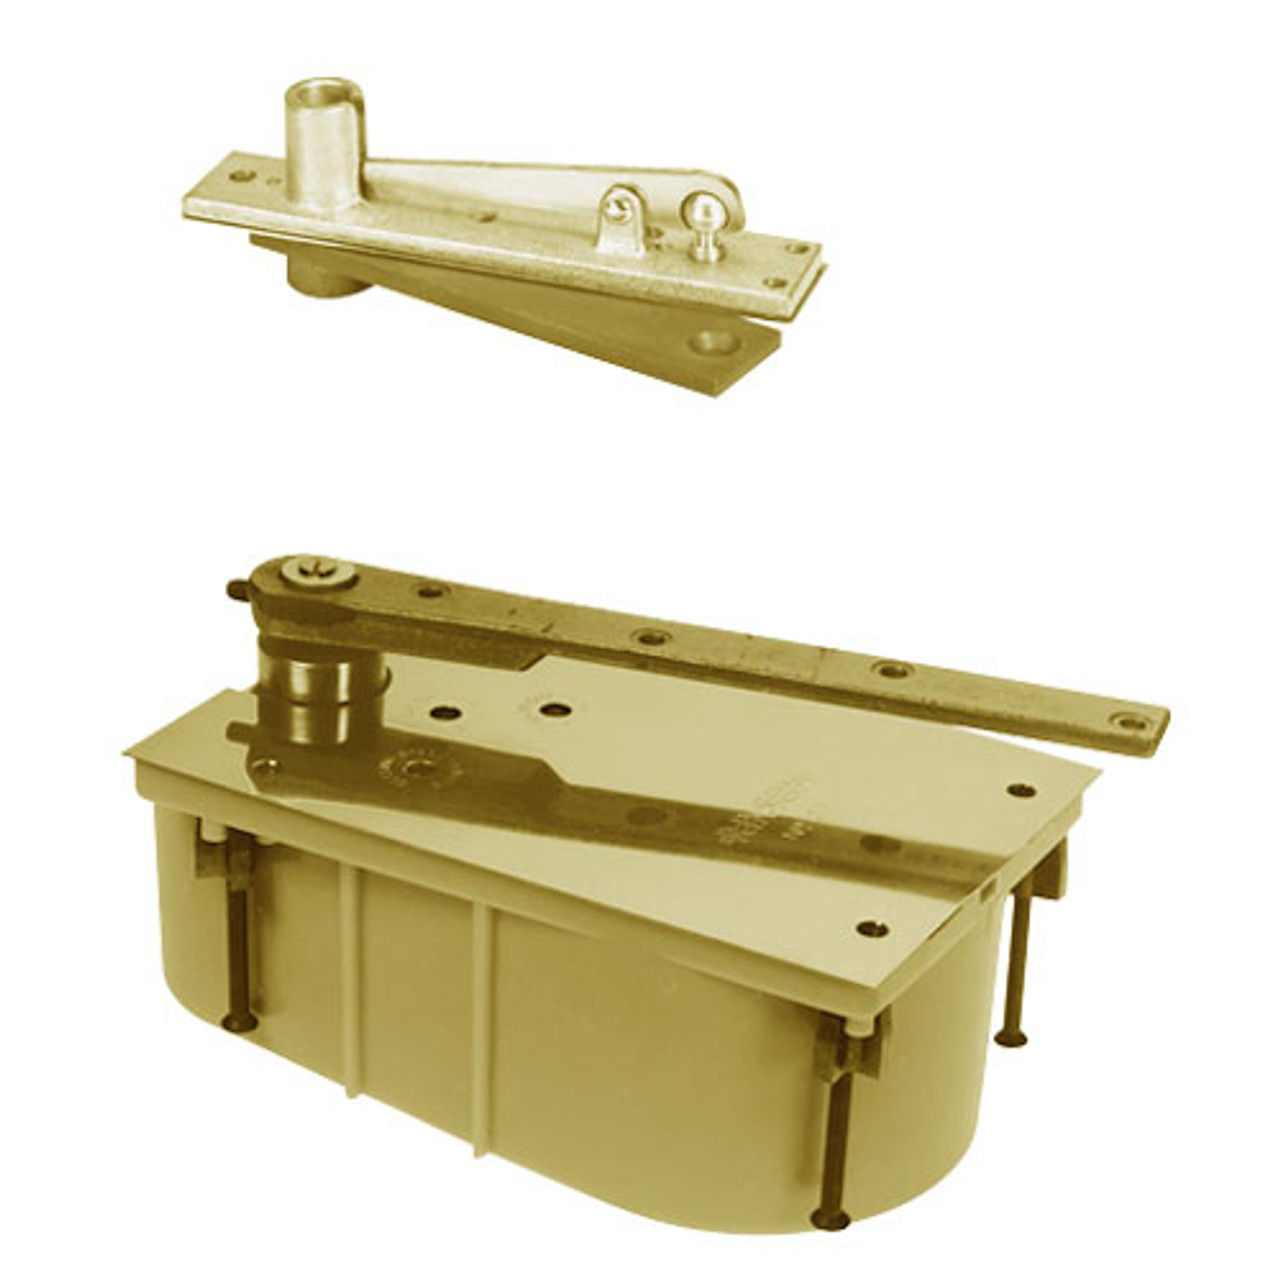 28-90S-554-LFP-RH-606 Rixson 28 Series Heavy Duty Single Acting Center Hung Floor Closer with Concealed Arm in Satin Brass Finish